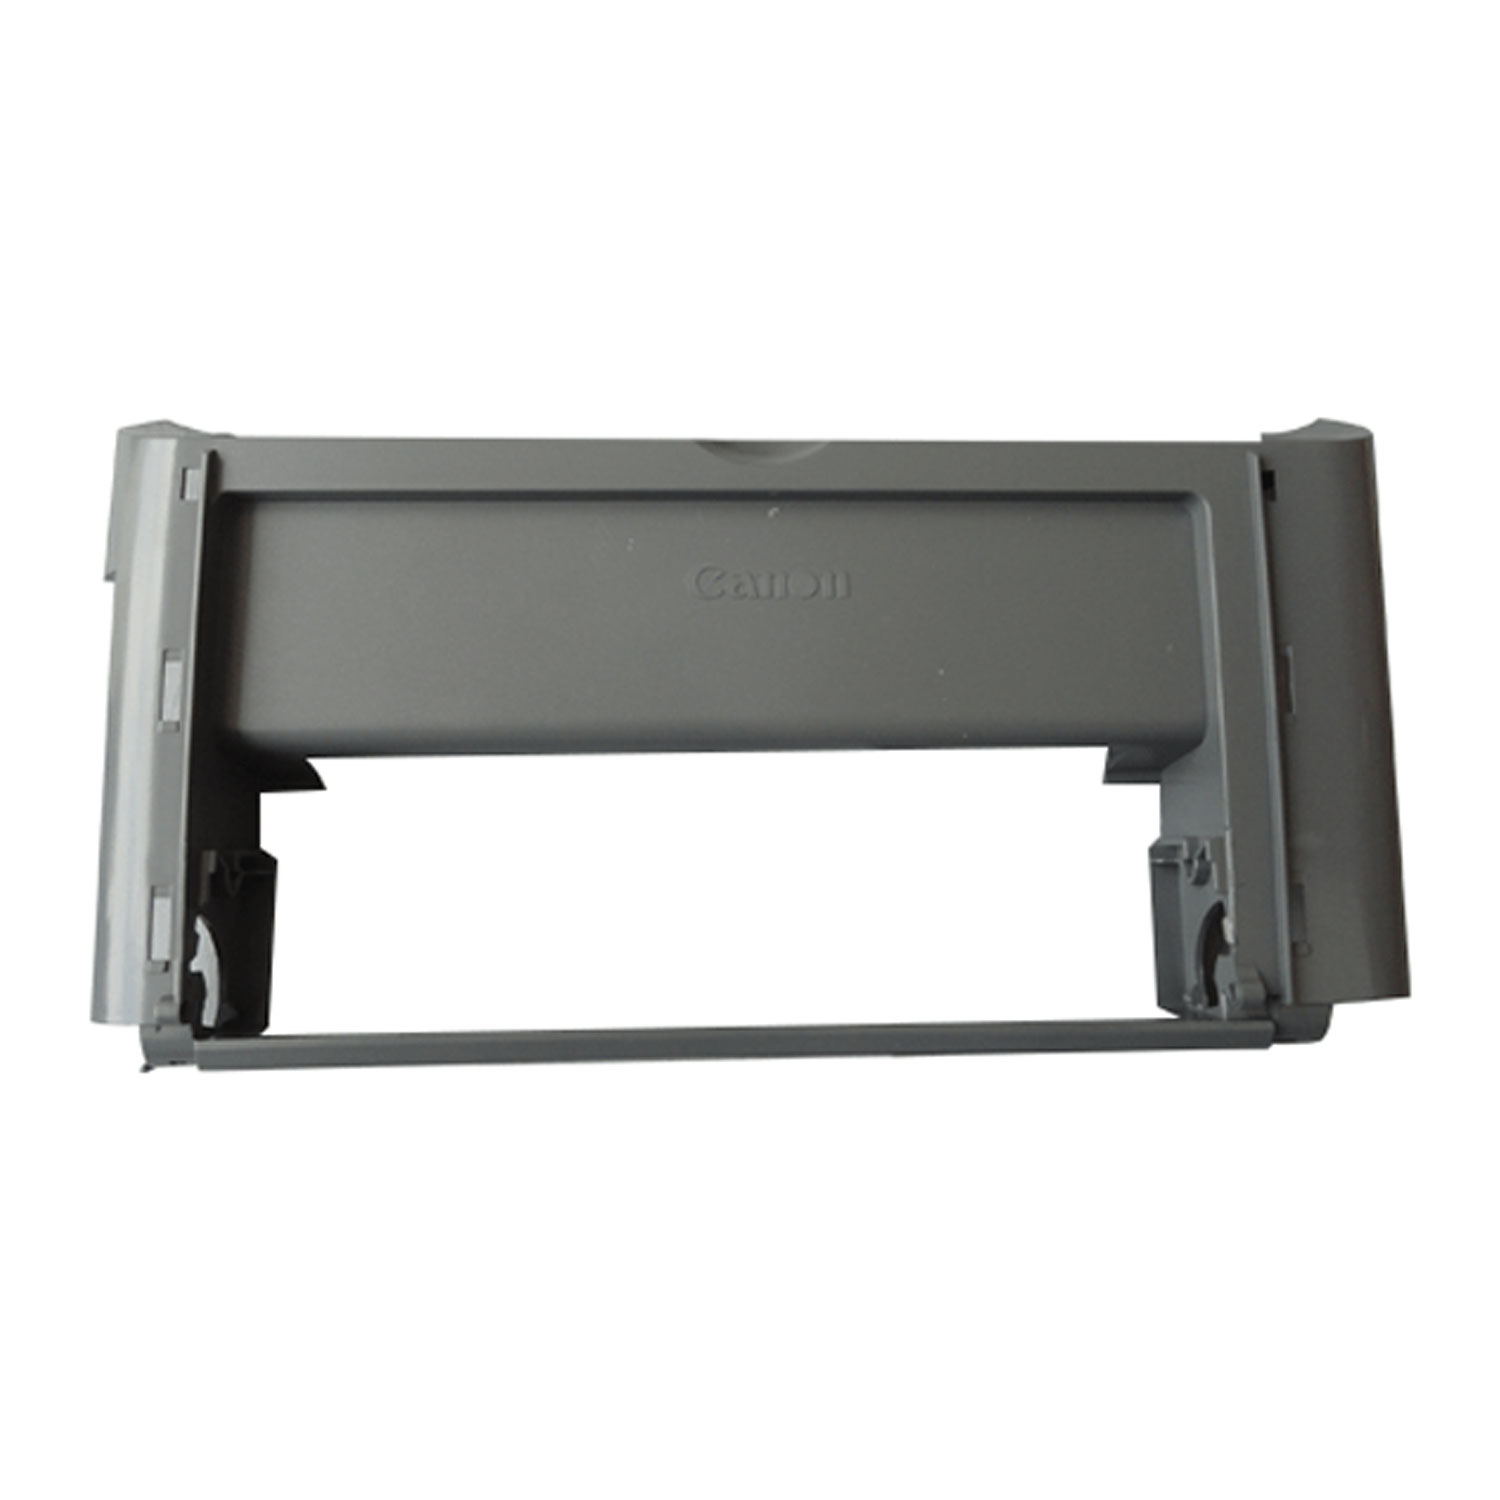 CANON LBP 2900 FRONT COVER FOR USE IN CANON LBP2900 PRINTER